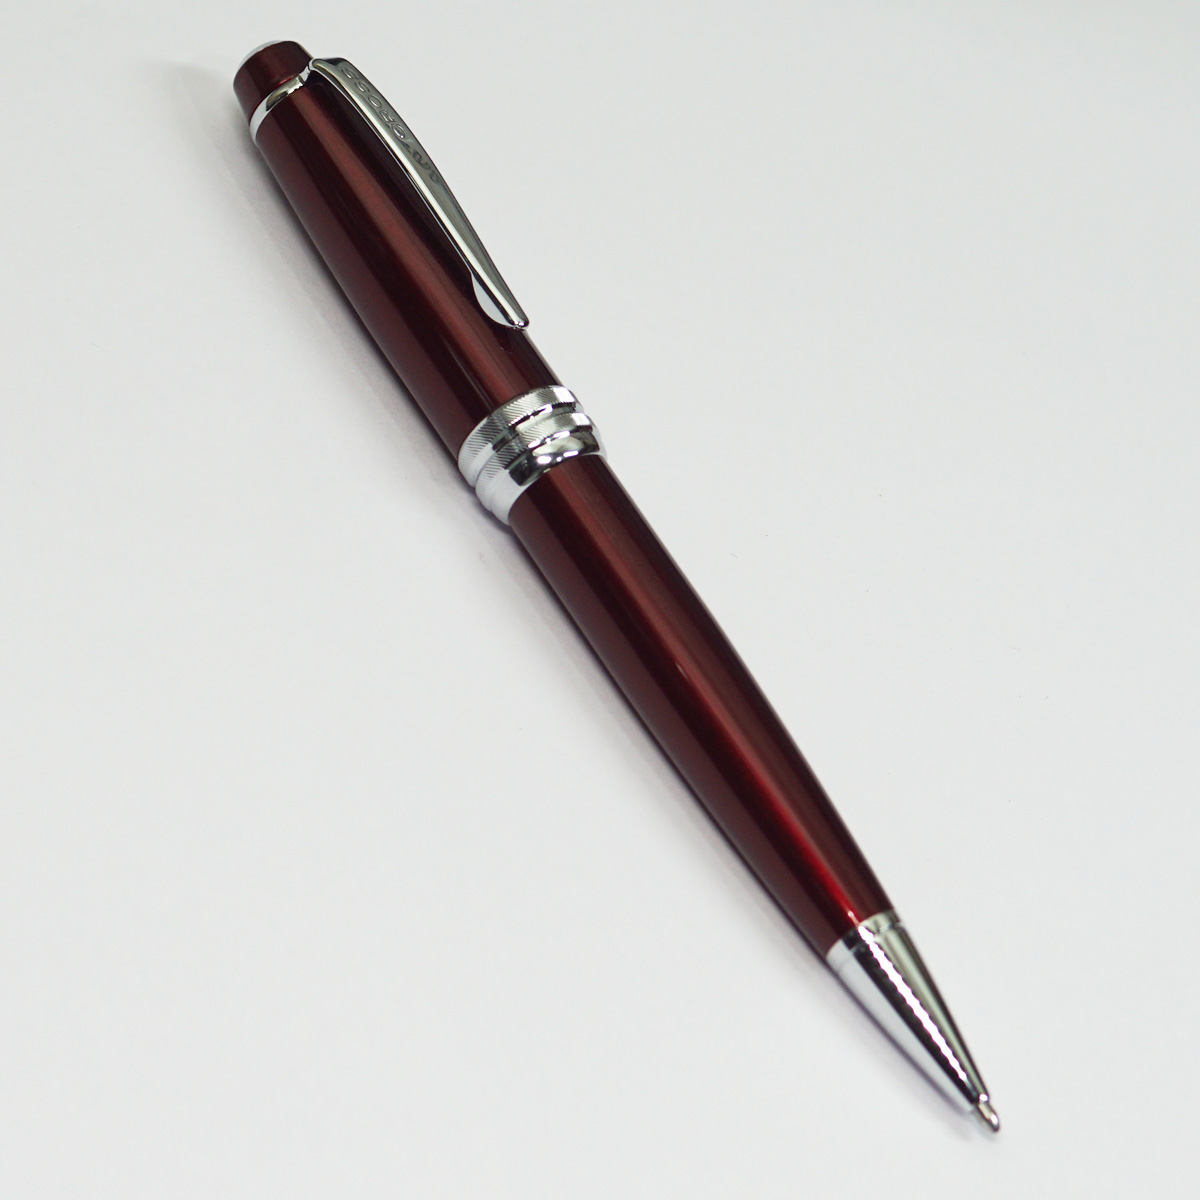 Cross Bailey AT0452 Marroon Color Metal Body And Cap With Medium Tip Silver Trims Twist Type Ball Pen SKU 23394